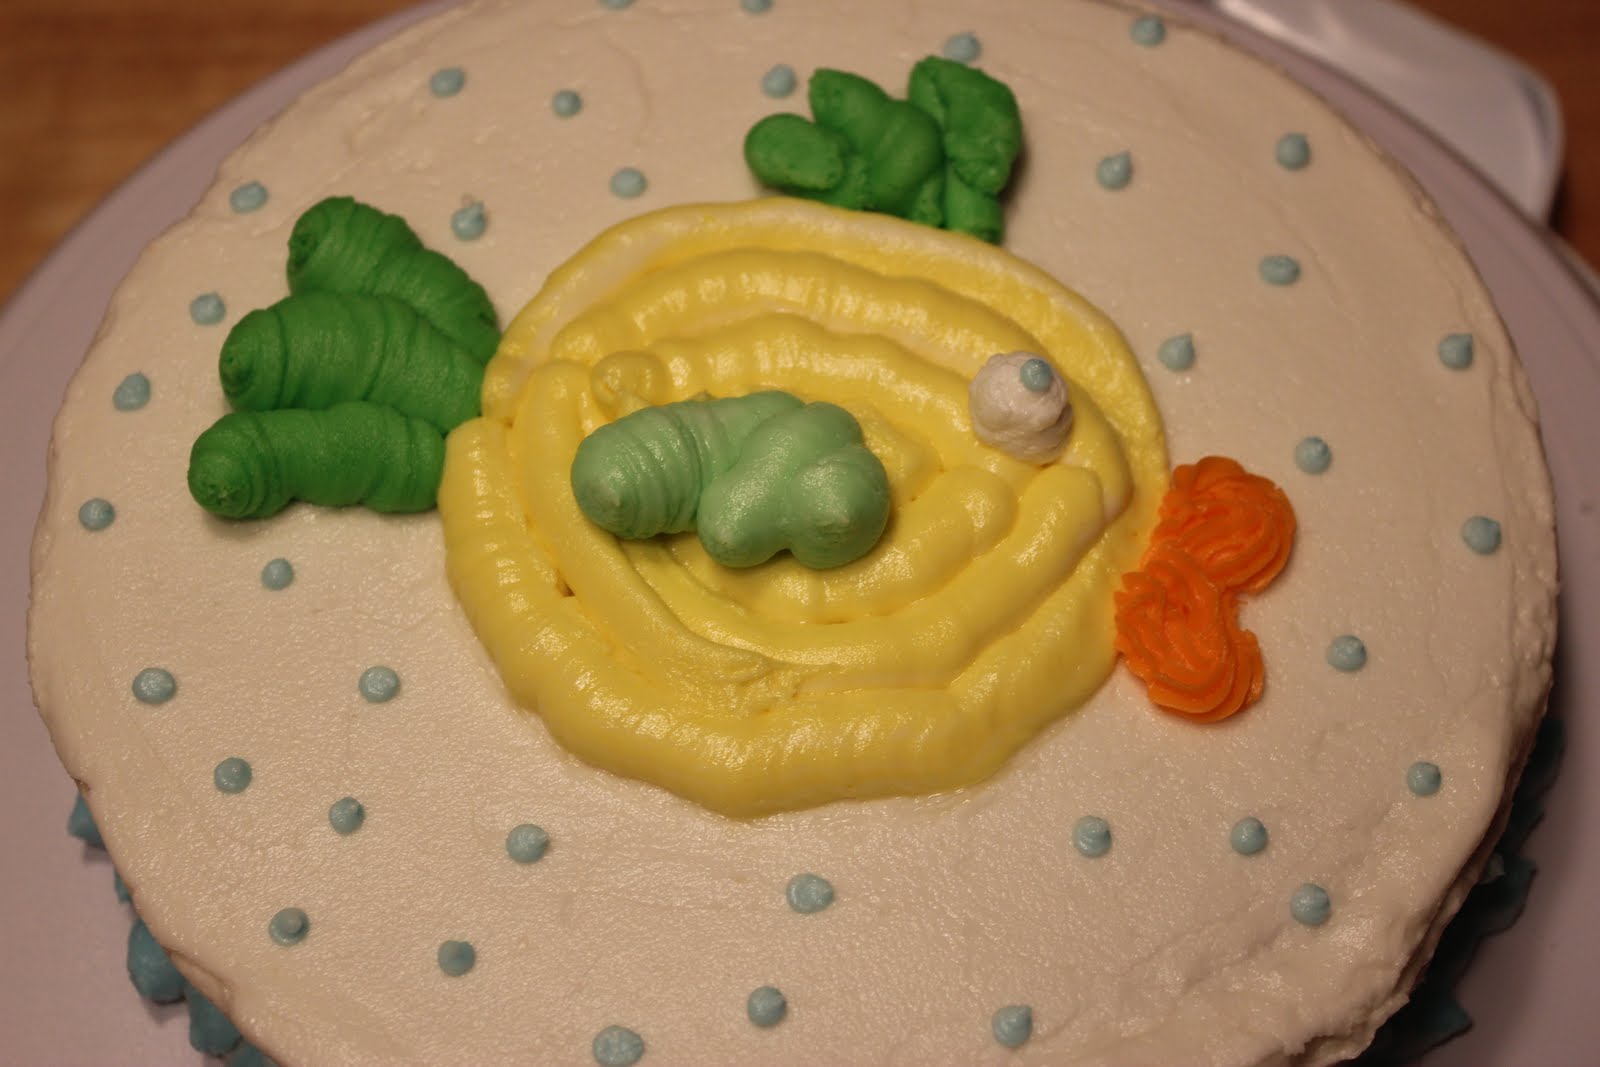 Chelsea's Choice: My First Wilton Basic Cake Decorating Class Cake!